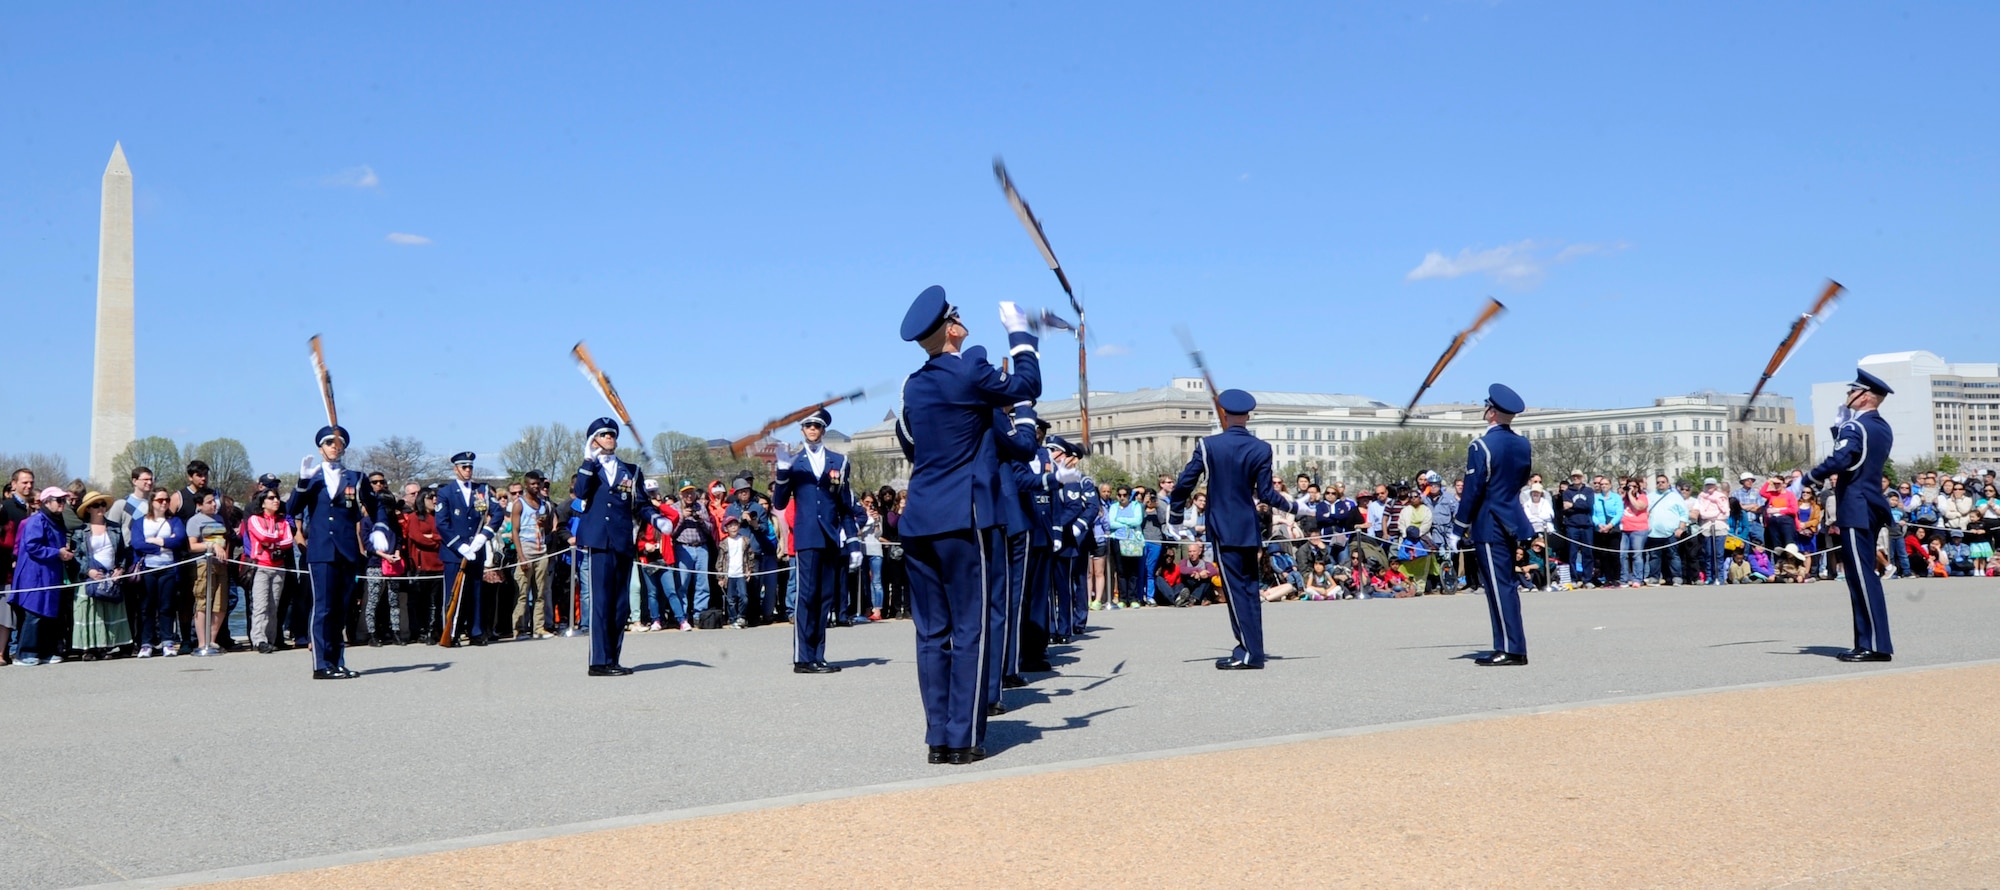 The United States Air Force Honor Guard performs during the Joint Service Drill Exhibition in Washington, D.C., April 11, 2015. The Old Guard, Army, Navy, Marines, Coast Guard and Naval Academy’s drill team also performed during the event. (U.S. Air Force photo/Airman 1st Class Ryan J. Sonnier)